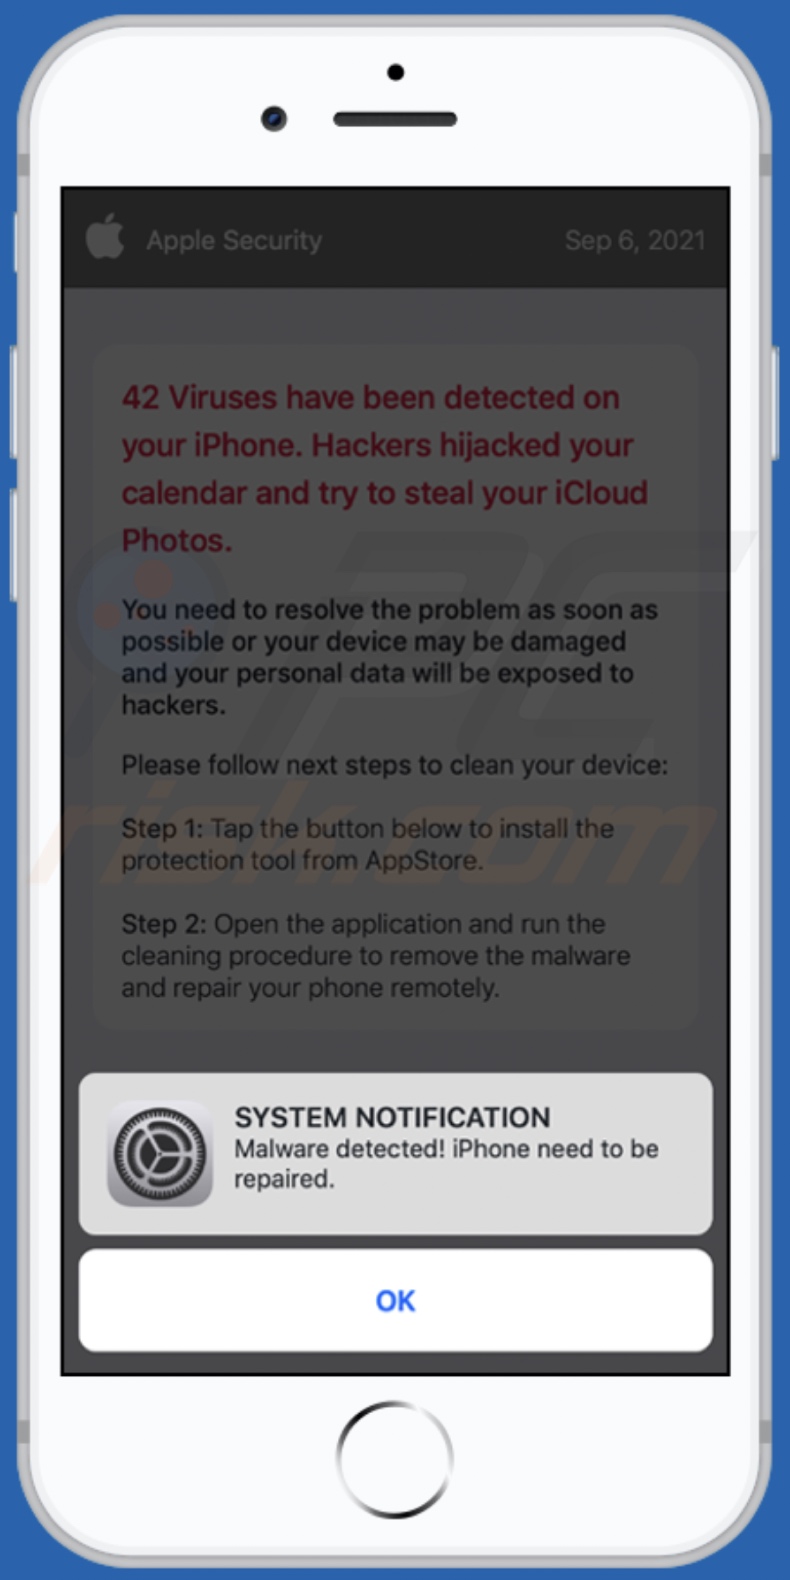 Malware detected! iPhone need to be repaired scam